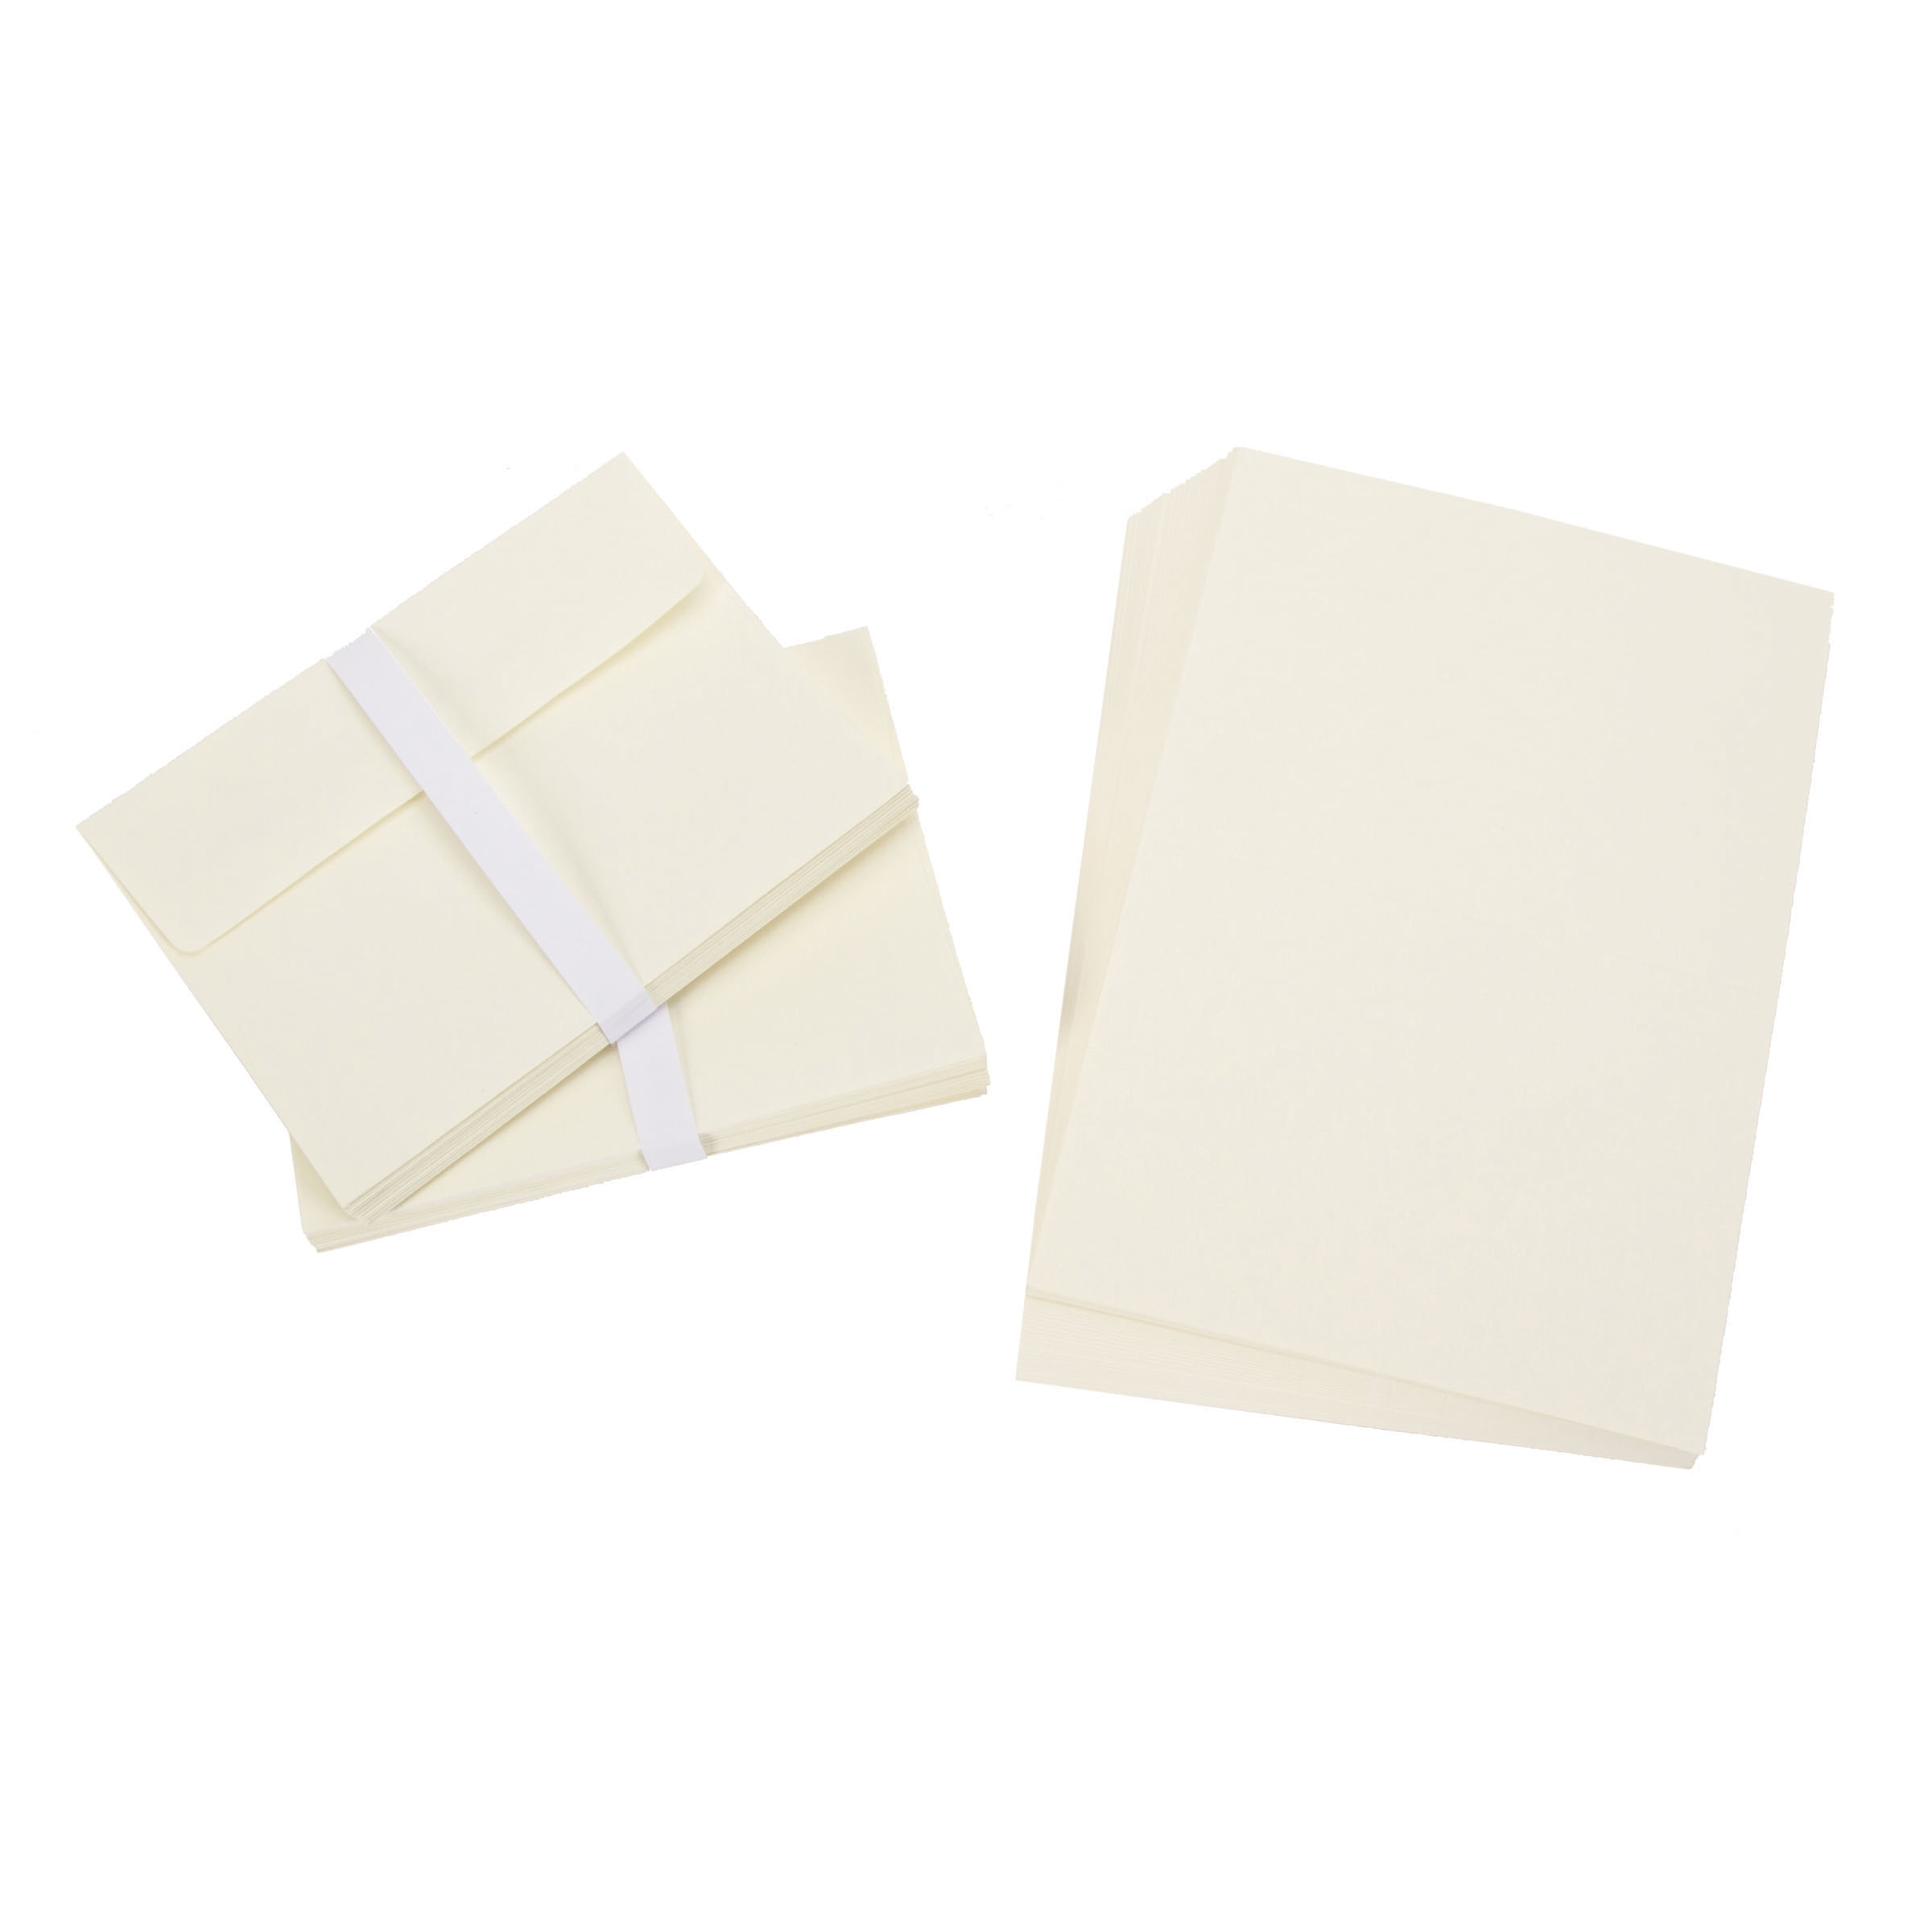 Darice Blank Ivory Cards with Envelopes, 5 x 7 Inches, 50 Pack ...